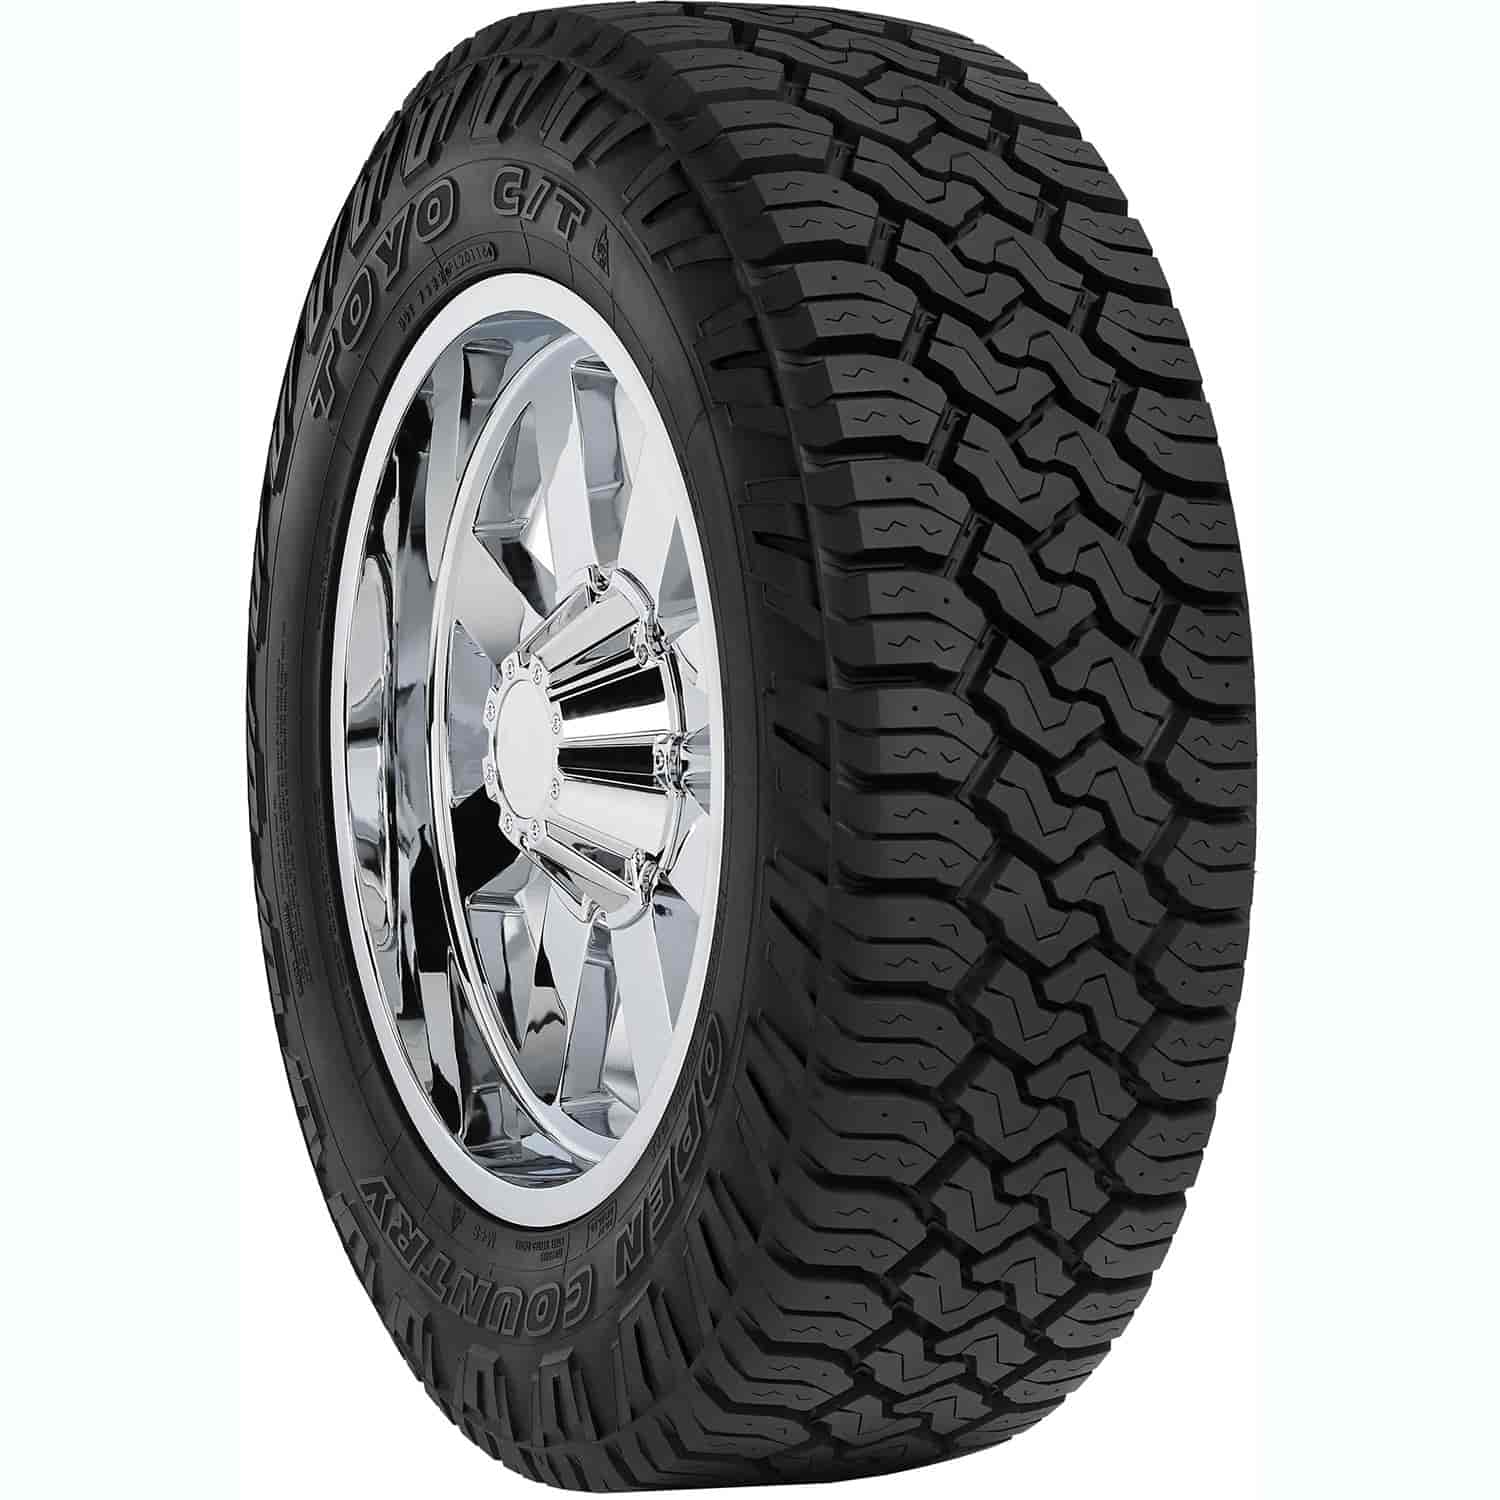 Open Country C/T Tire LT275/65R18 123/120Q